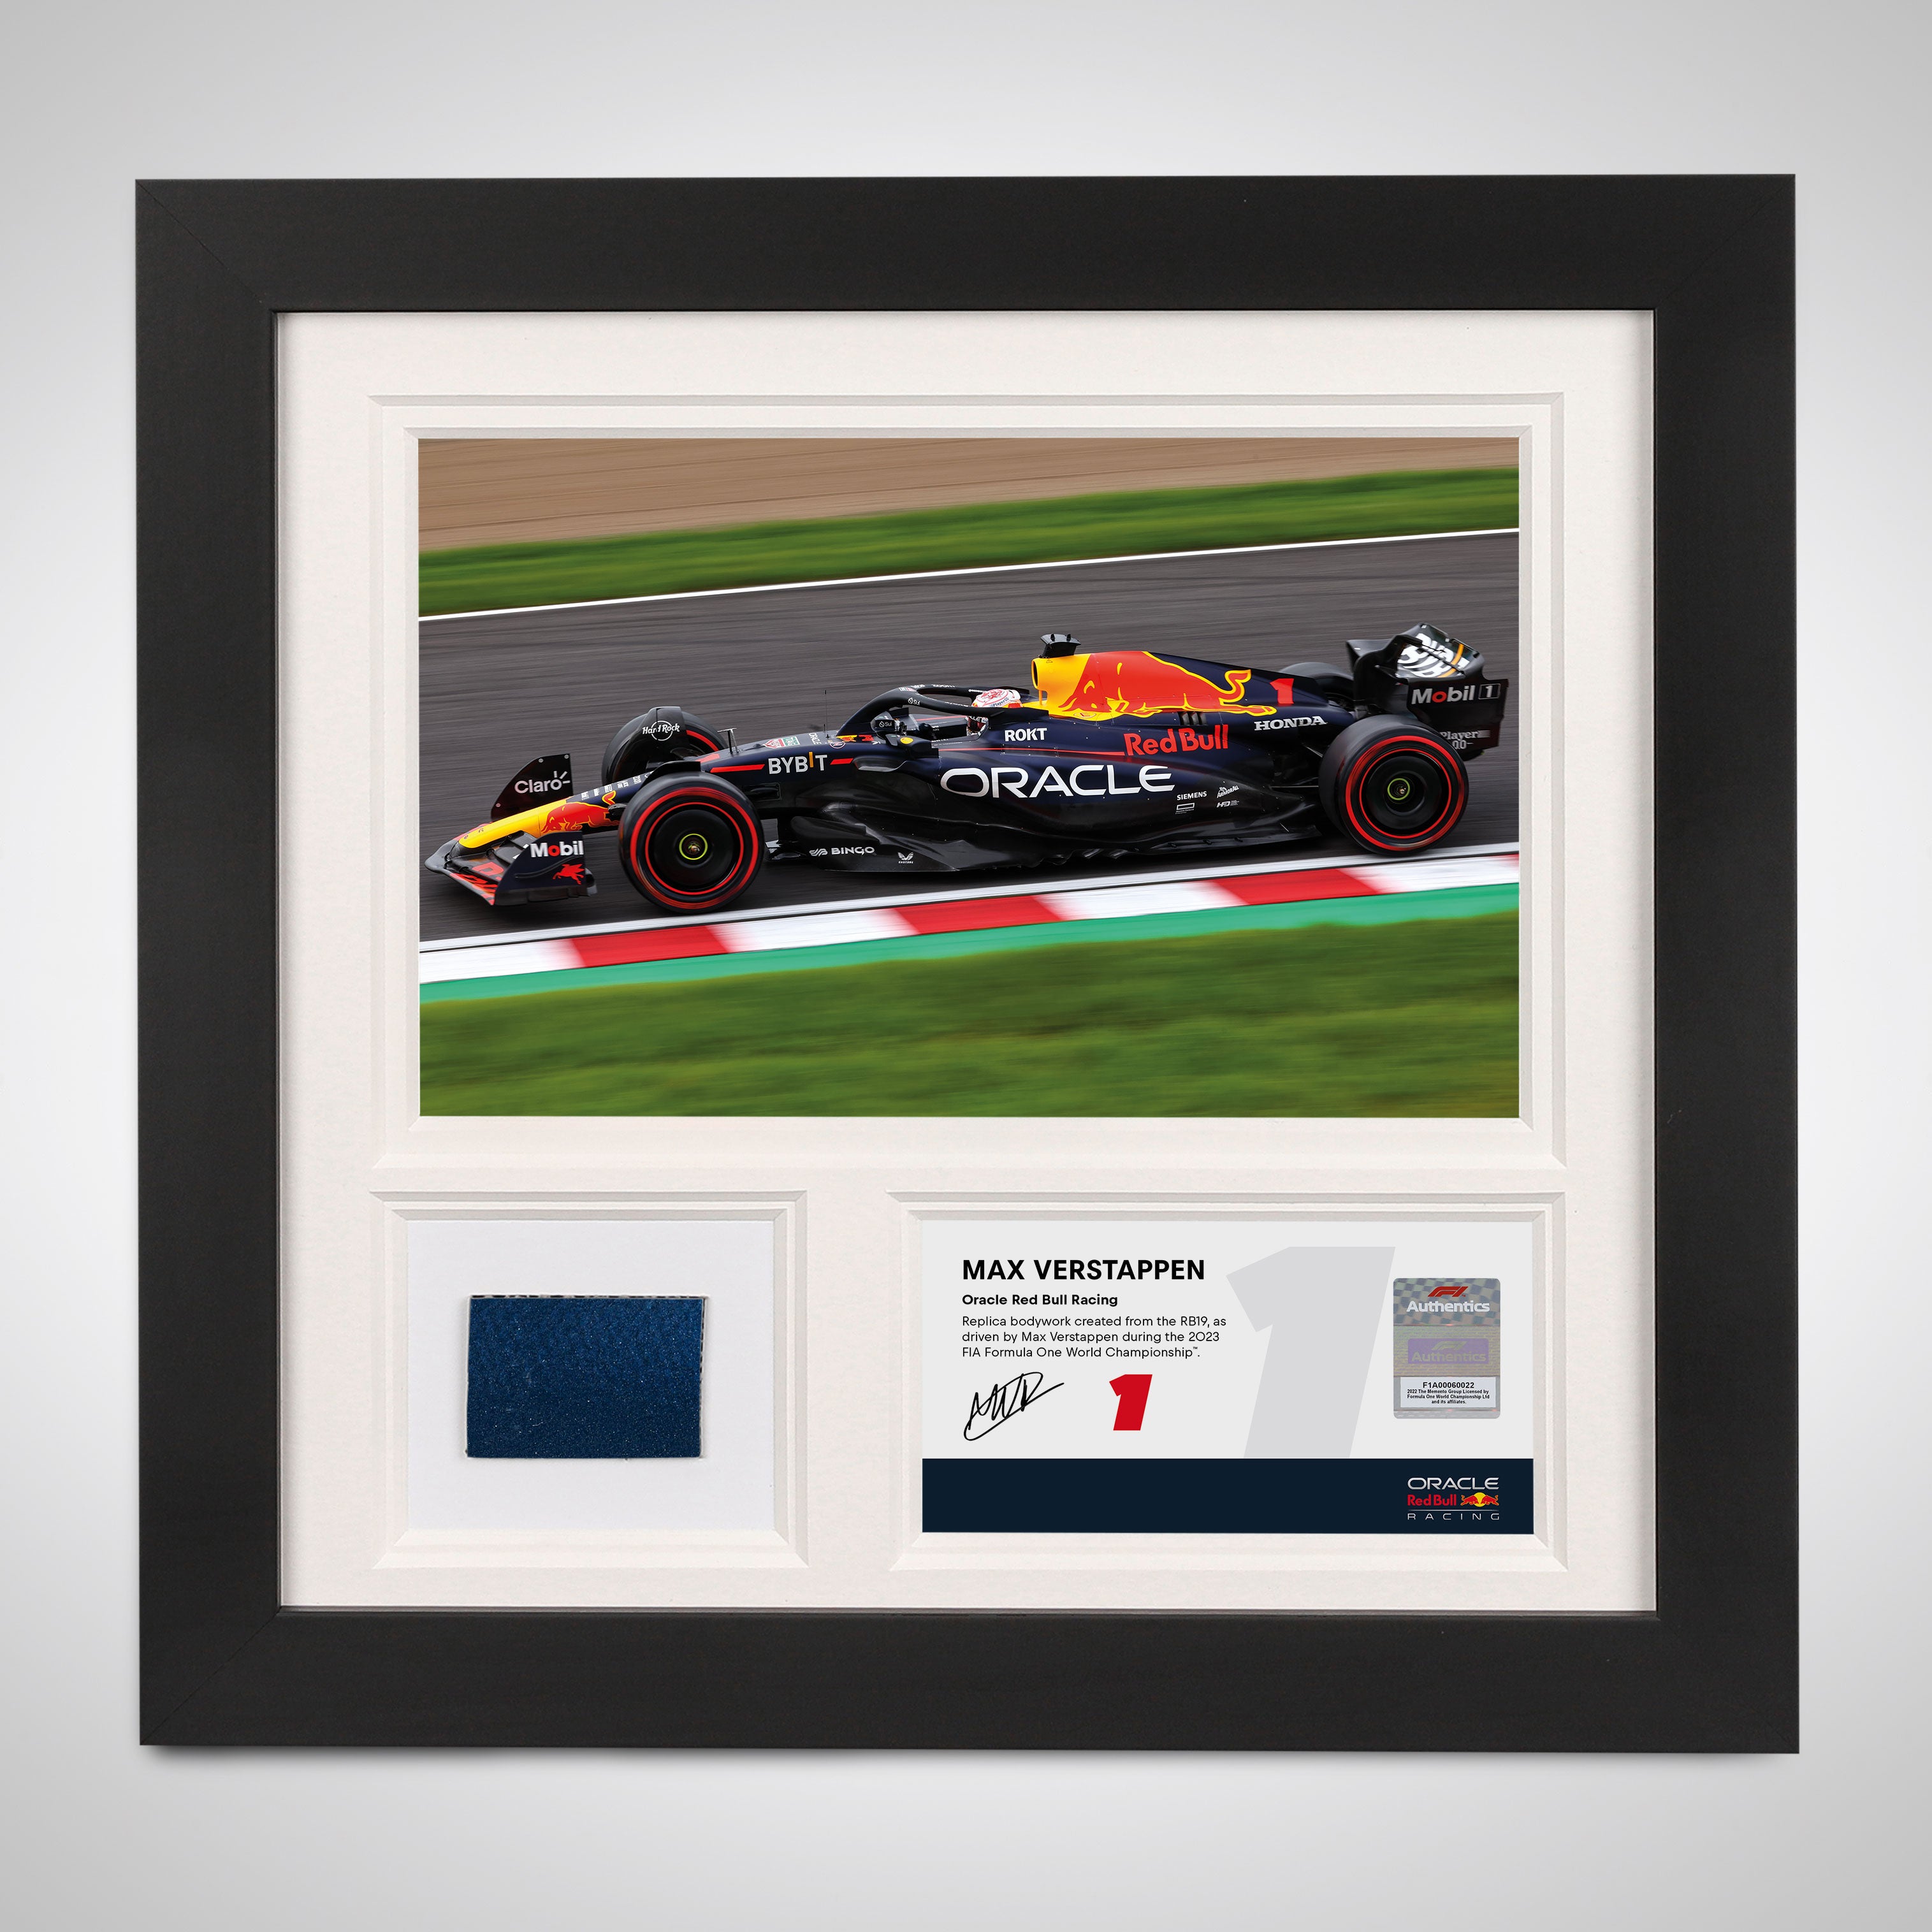 Oracle Red Bull Racing Official Online Store